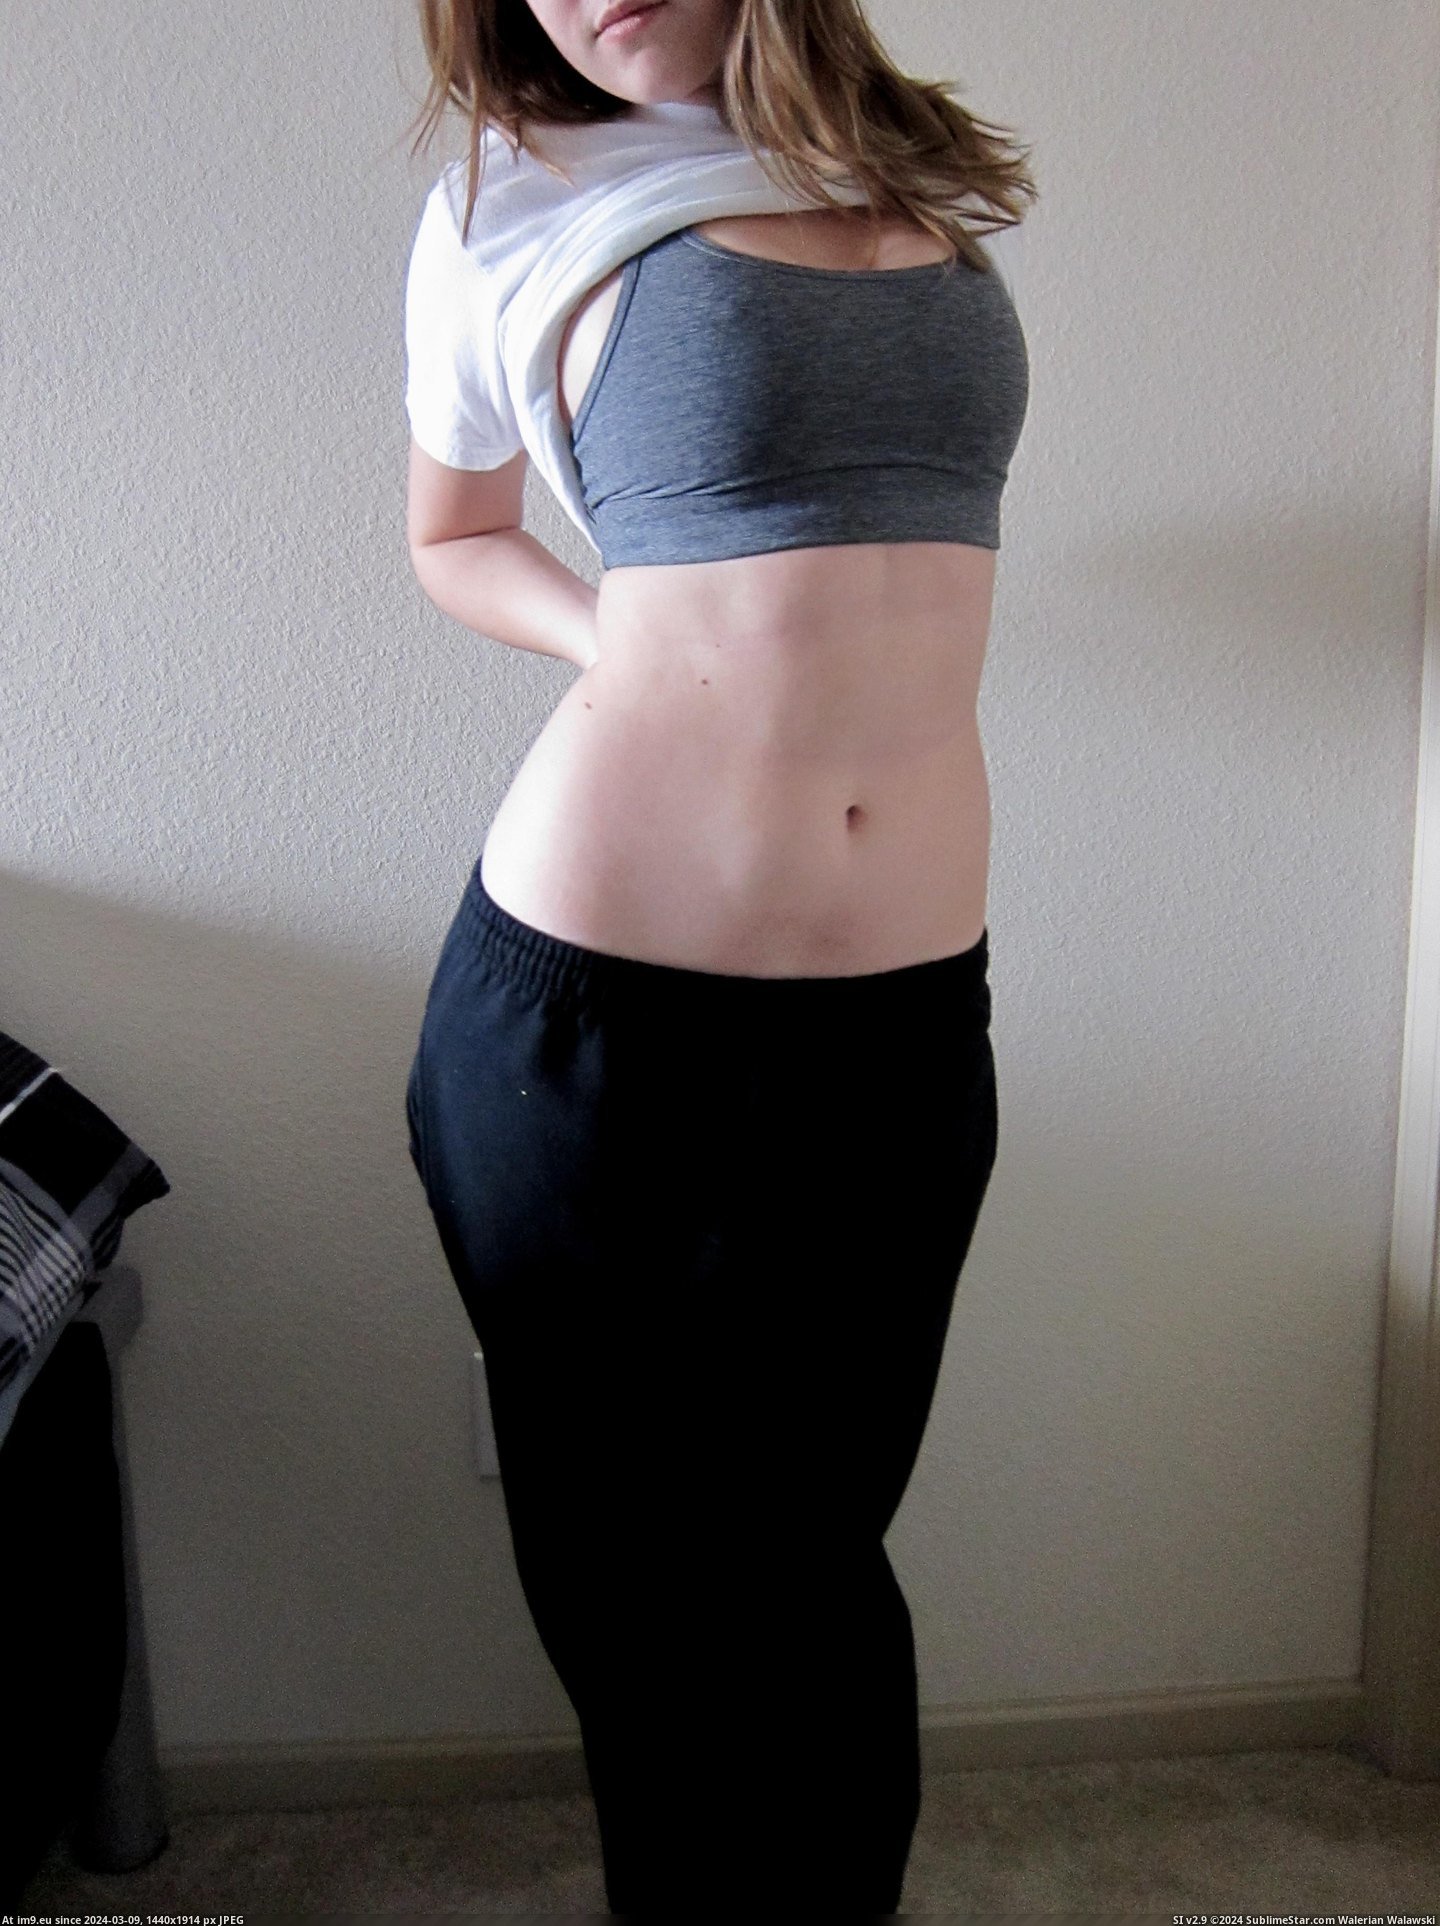 #Uck  #Sweatpants [Gonewild] [F]uck me in my sweatpants.... ;) 2 Pic. (Image of album My r/GONEWILD favs))